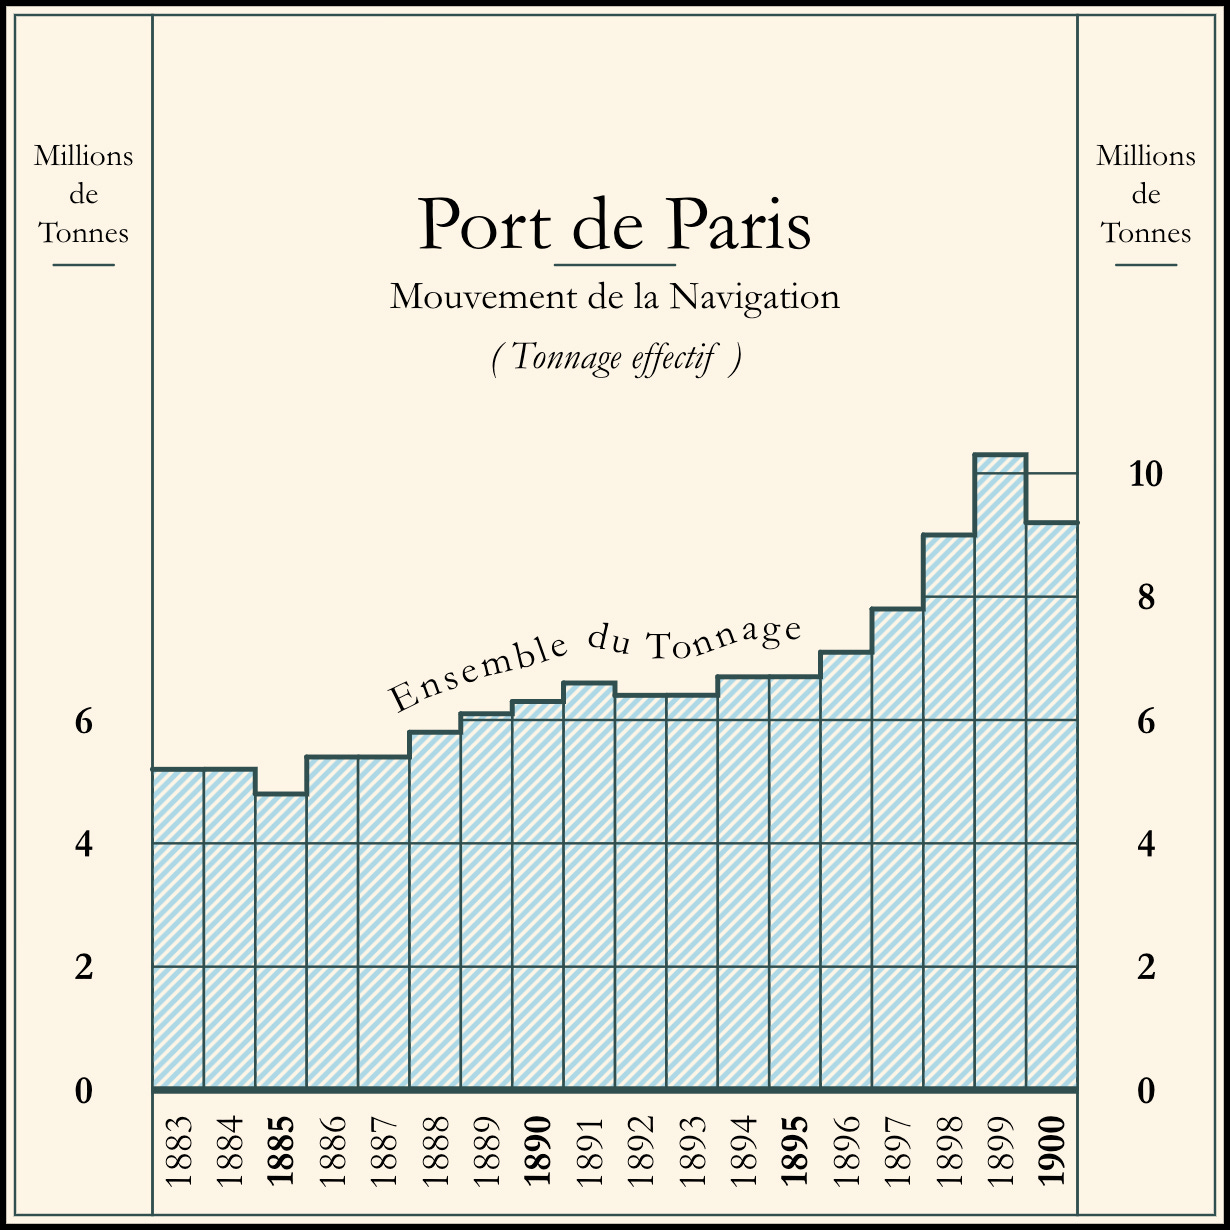 This vertical bar chart, or column chart, features several flourishes which ehance its design: asymetric vertical axis labels, bolded baseline labels every five years, emphasized zero-baseline weight, a grid that only appears over data, and a series label that follows the shape of the trend.  This chart was inspired by an inset graphic by Émile Cheysson, "Navigation Intérieure. II. Tonnage kilométrique," in the 1906 Album du statistique graphique.